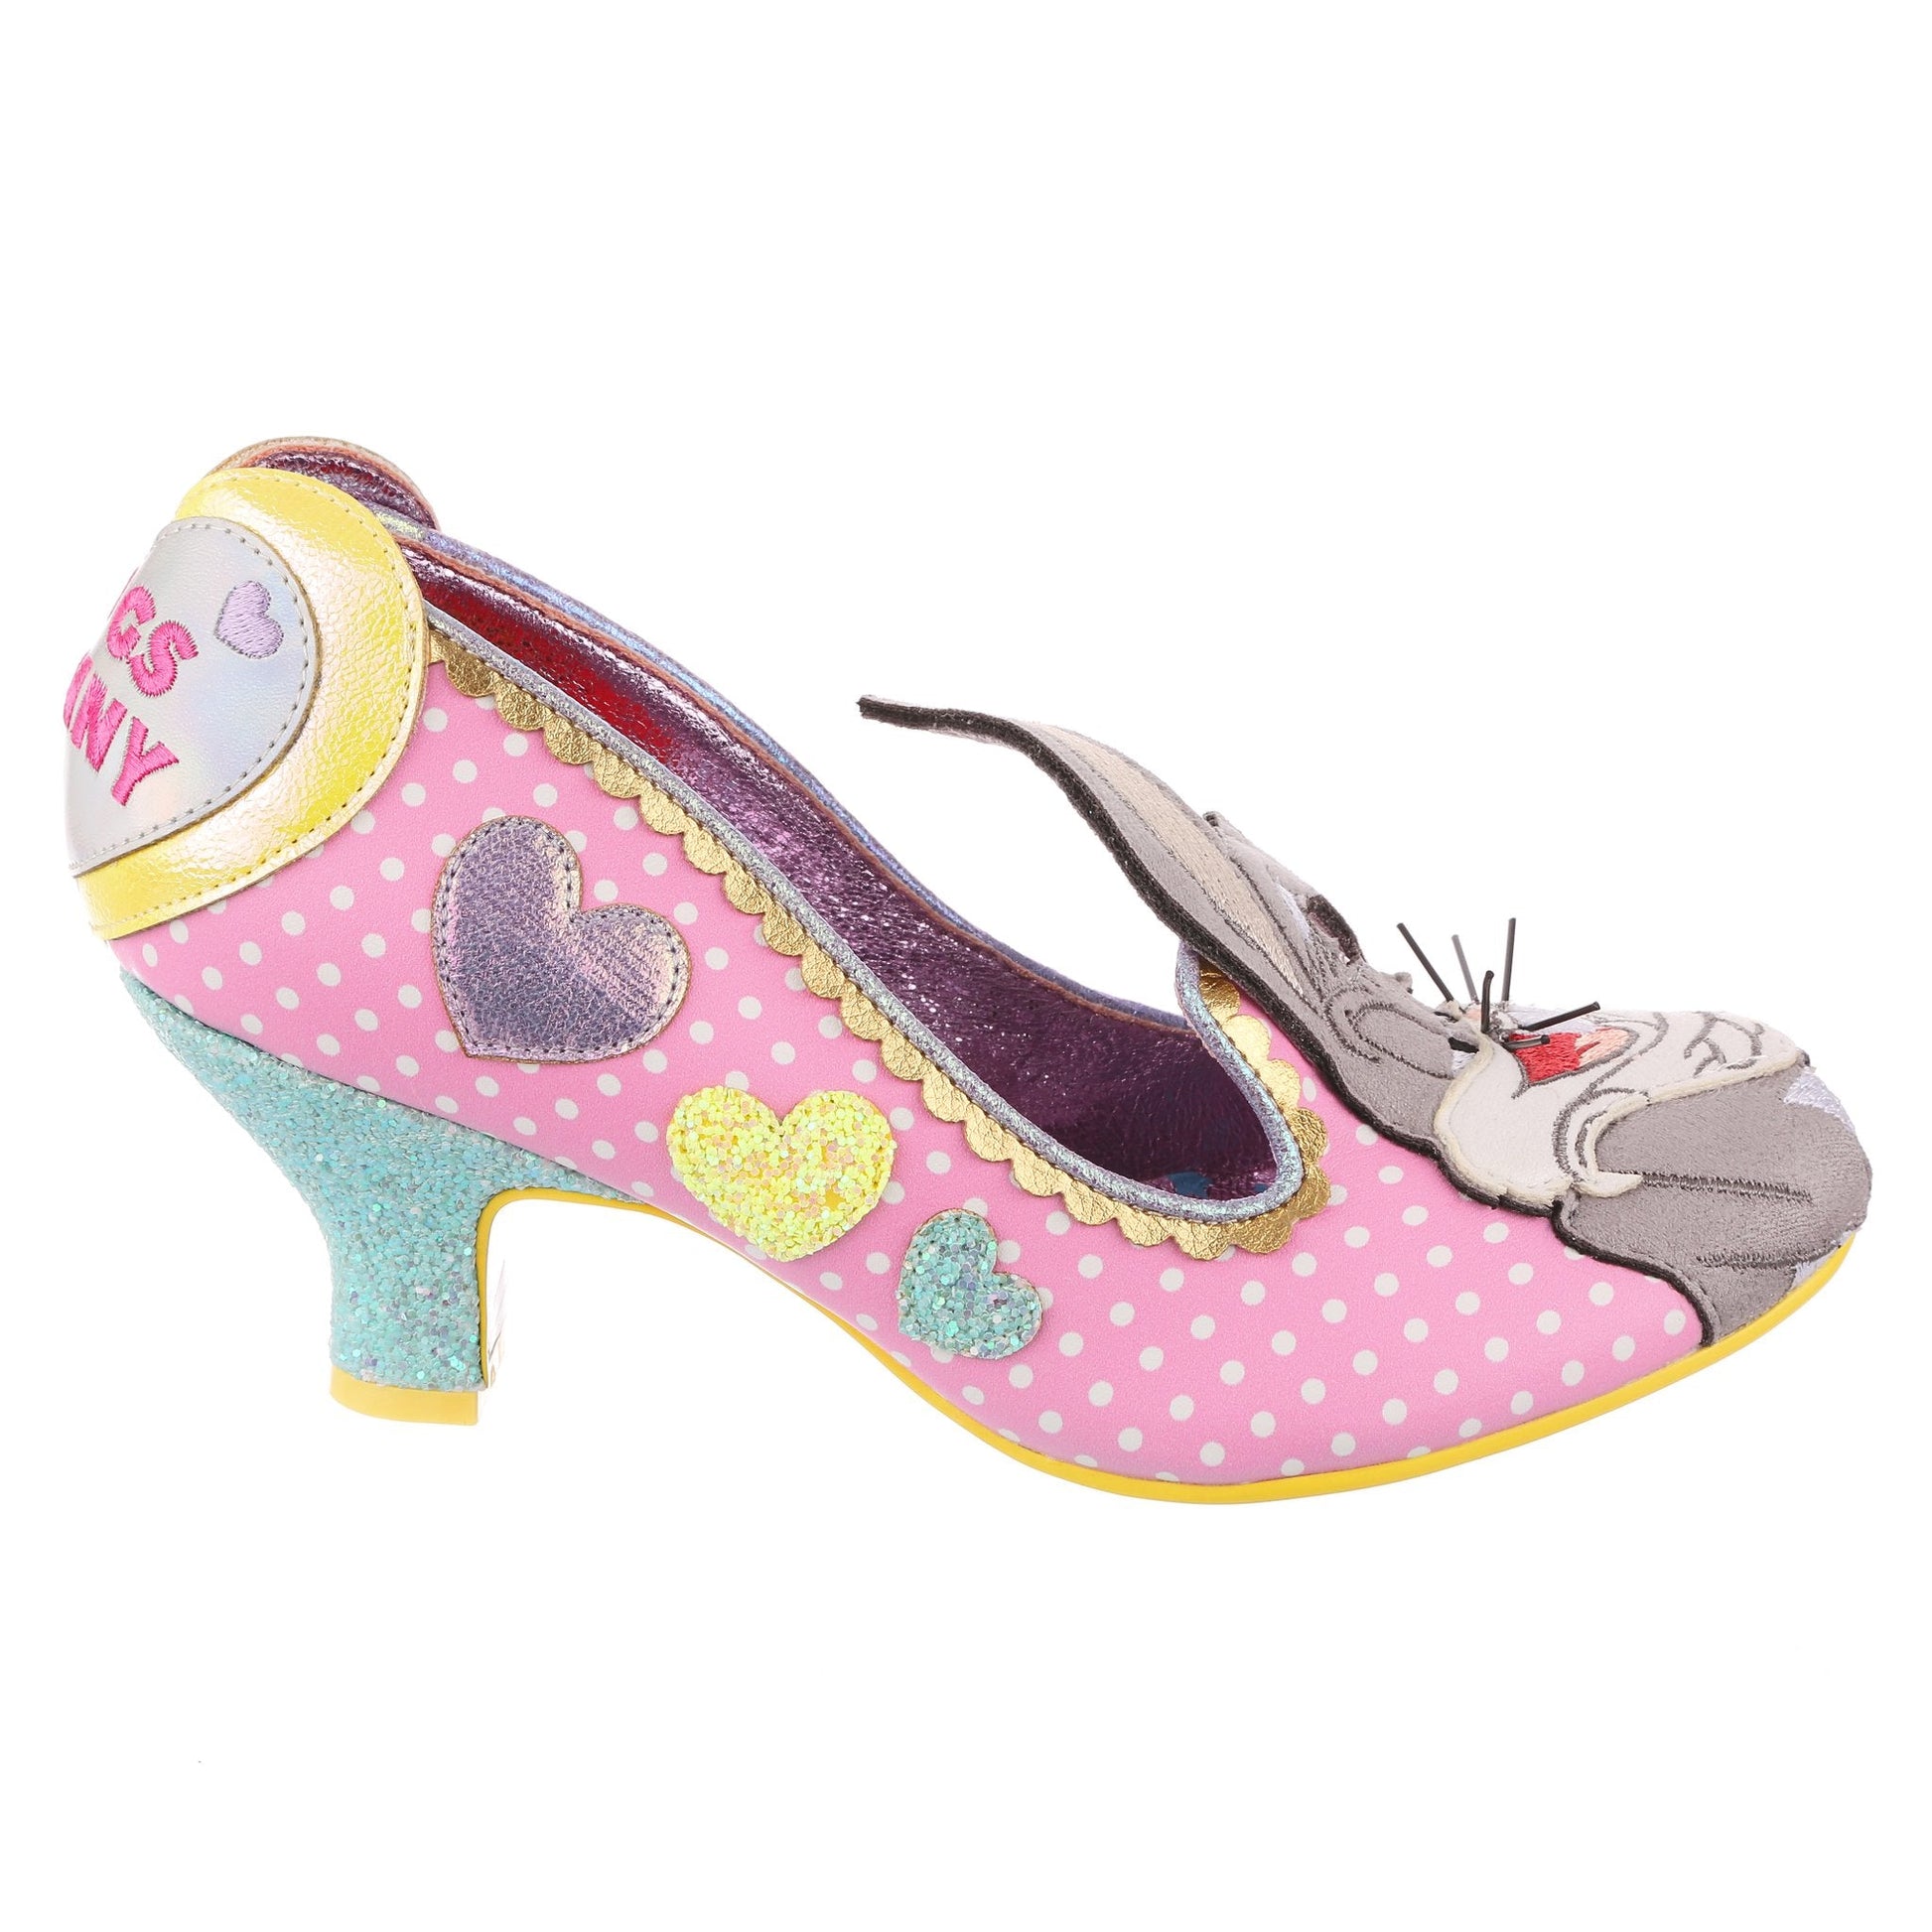 Bunny Love (Pink, Multi A) - Rockamilly-Shoes-Vintage